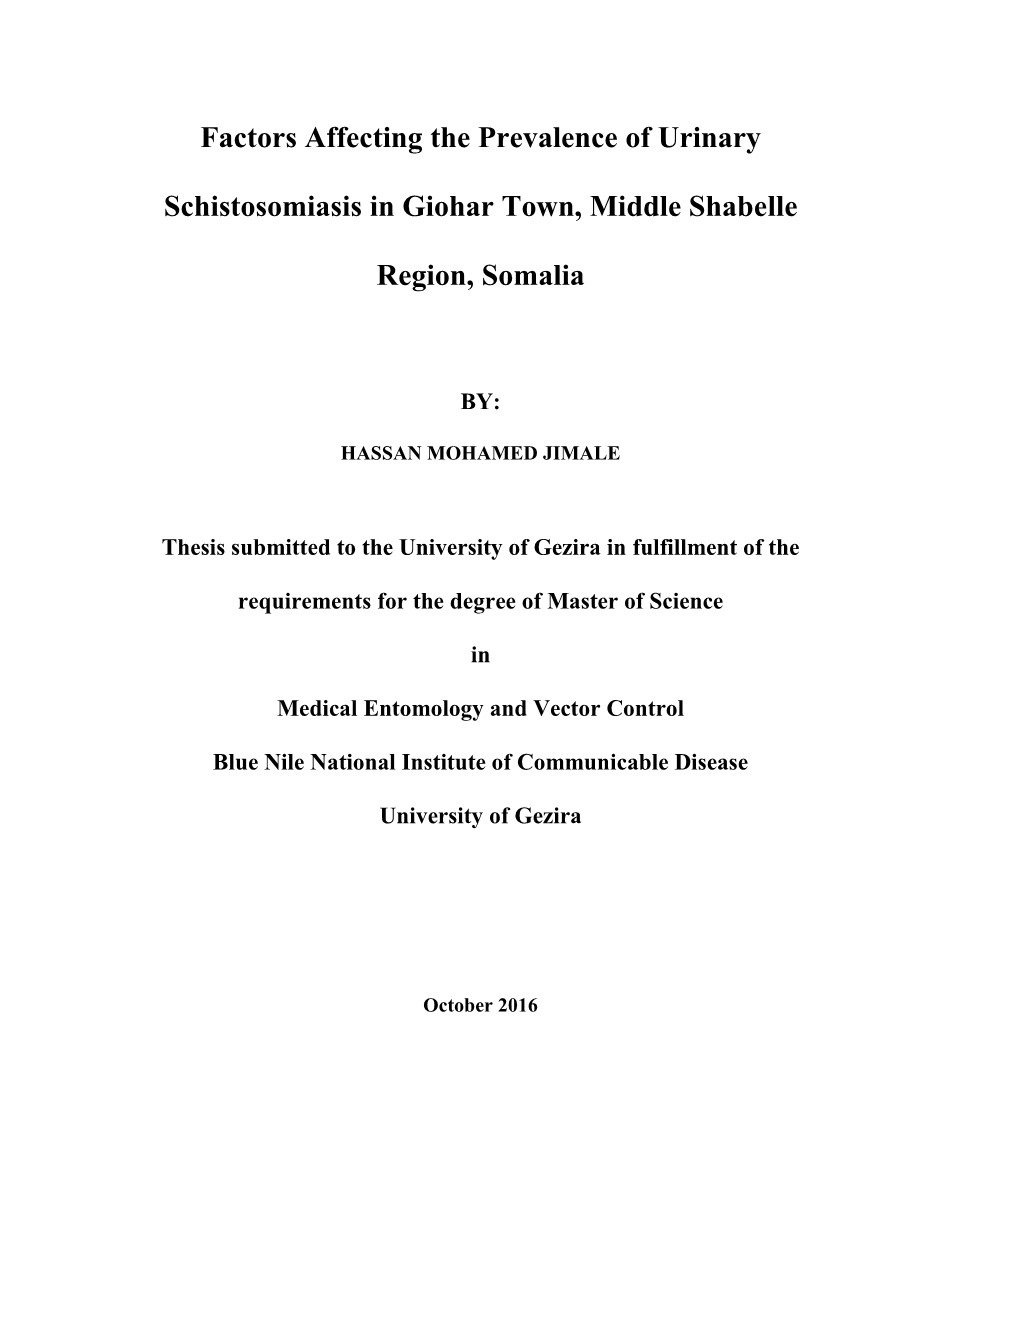 Factors Affecting the Prevalence of Urinary Schistosomiasis in Giohar Town, Middle Shabelle Region, Somalia